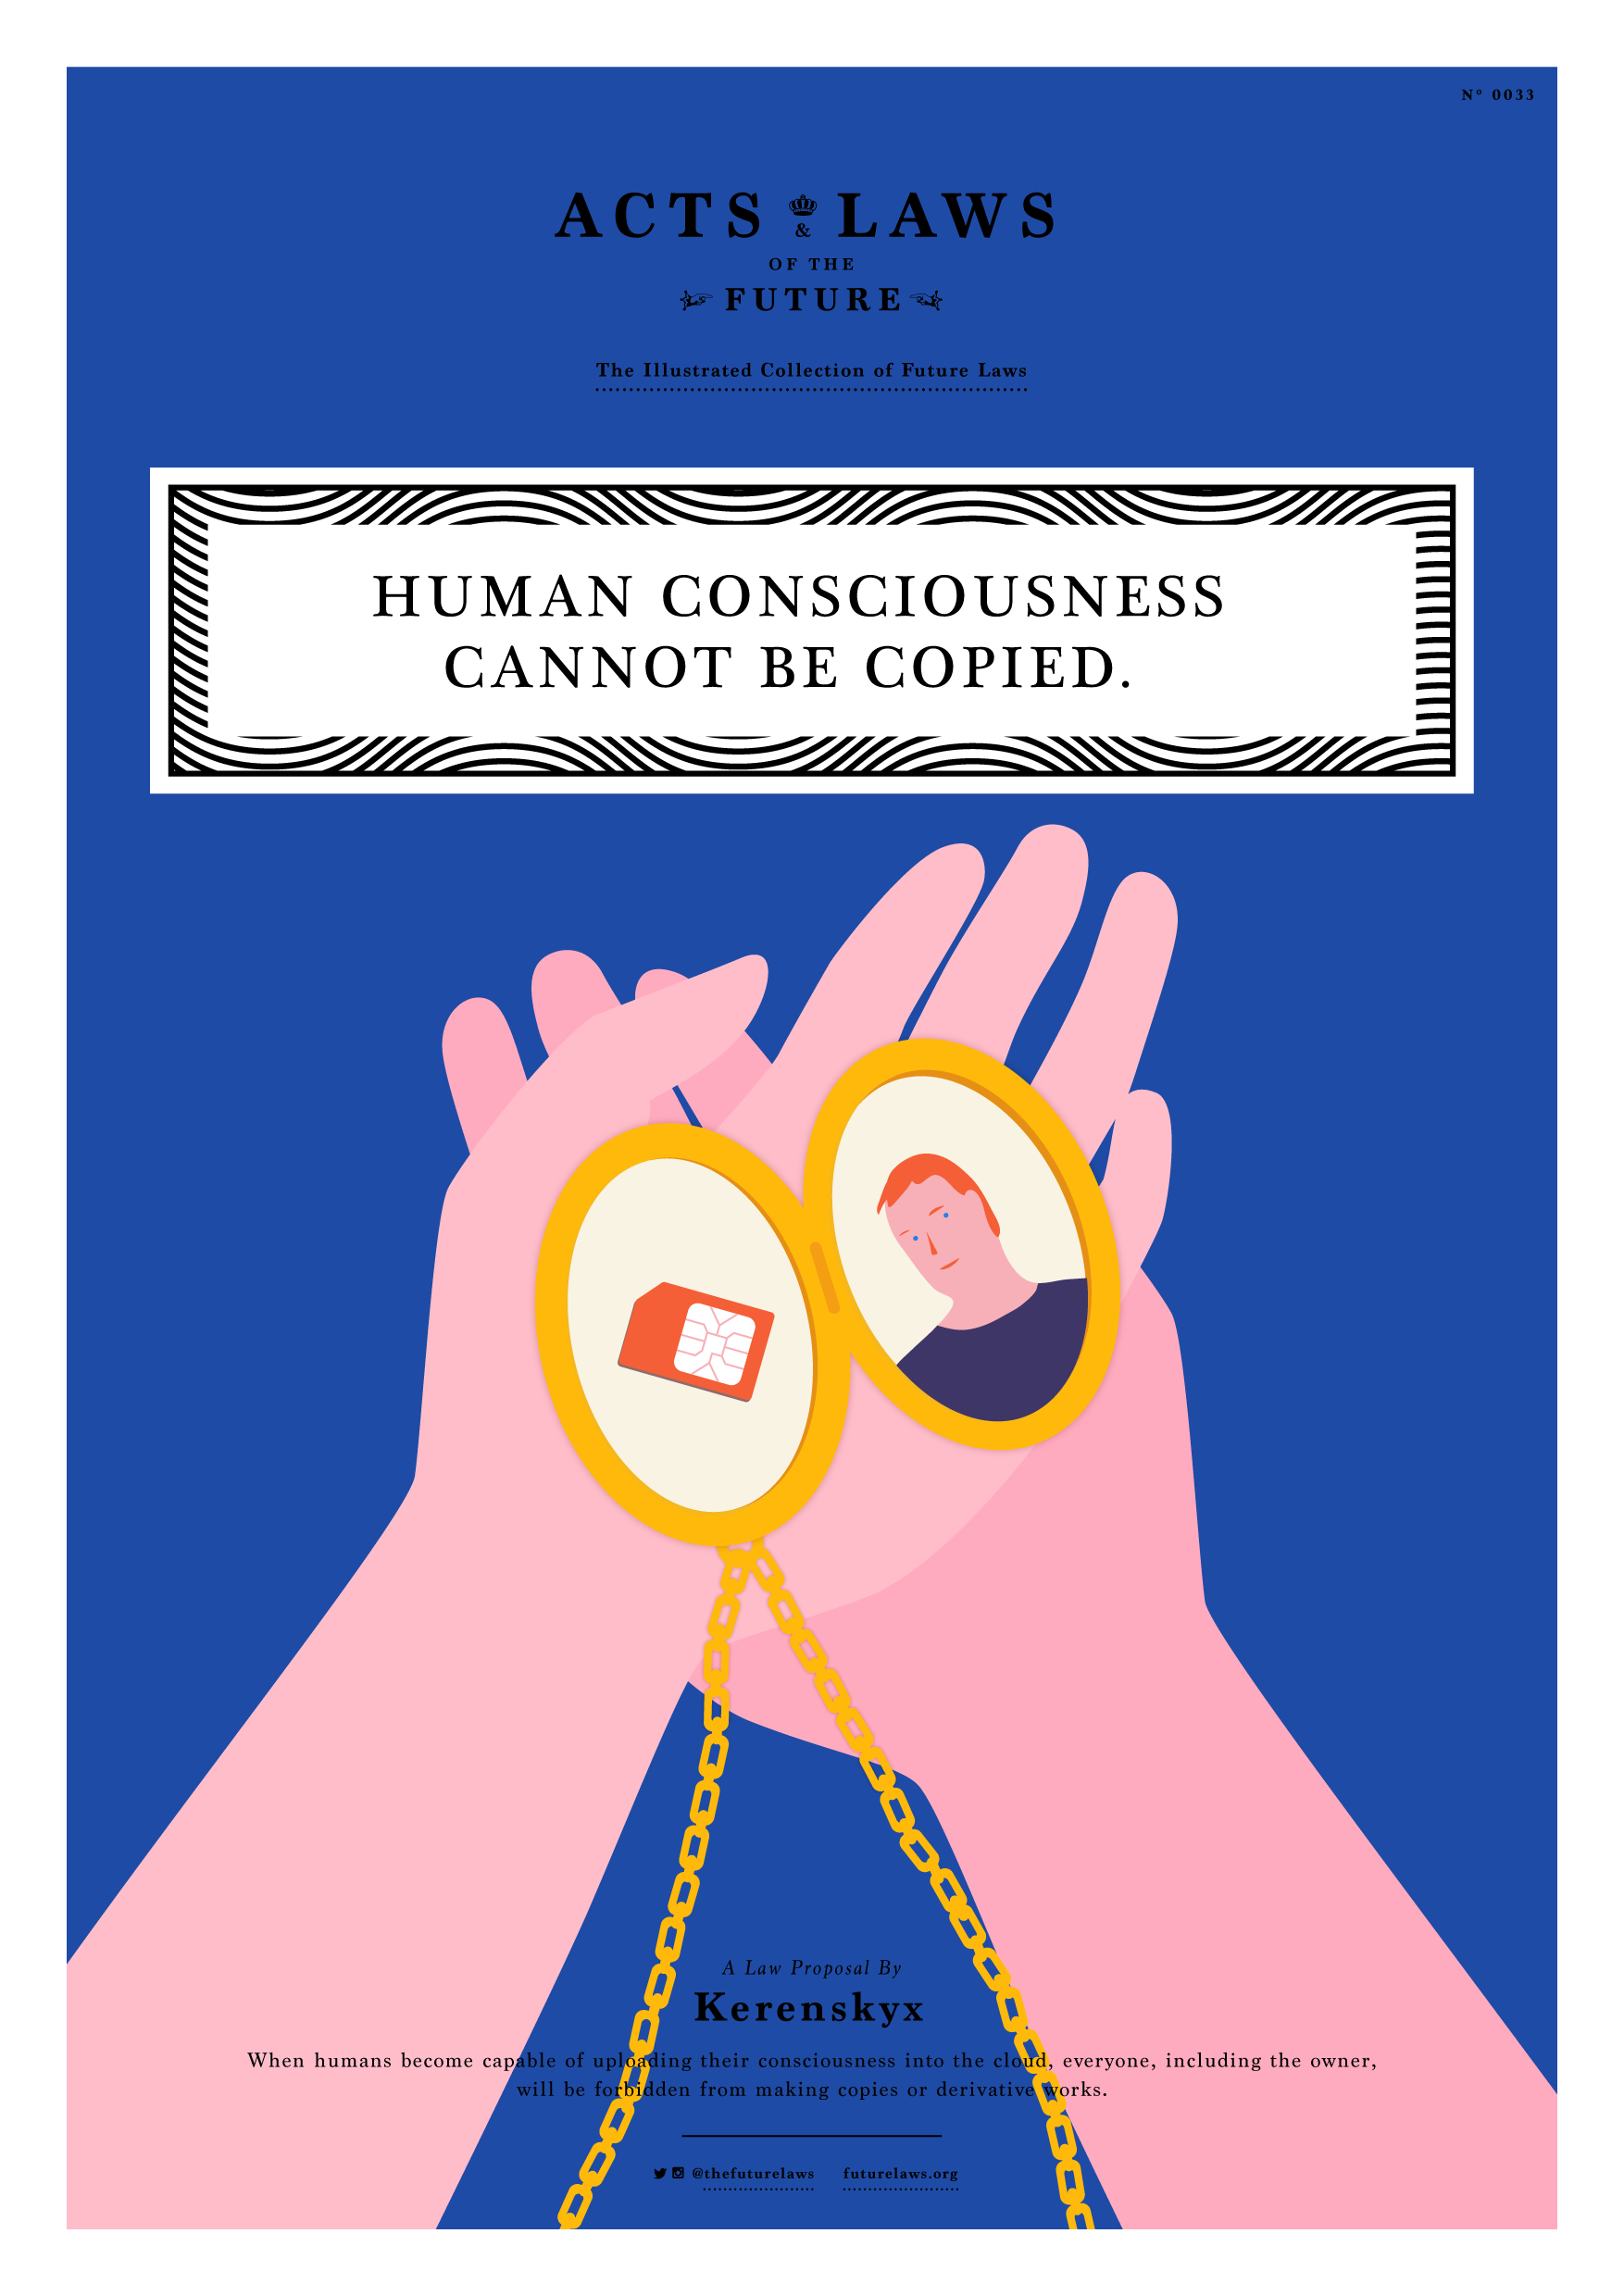 Human Consciousness cannot be copied.  